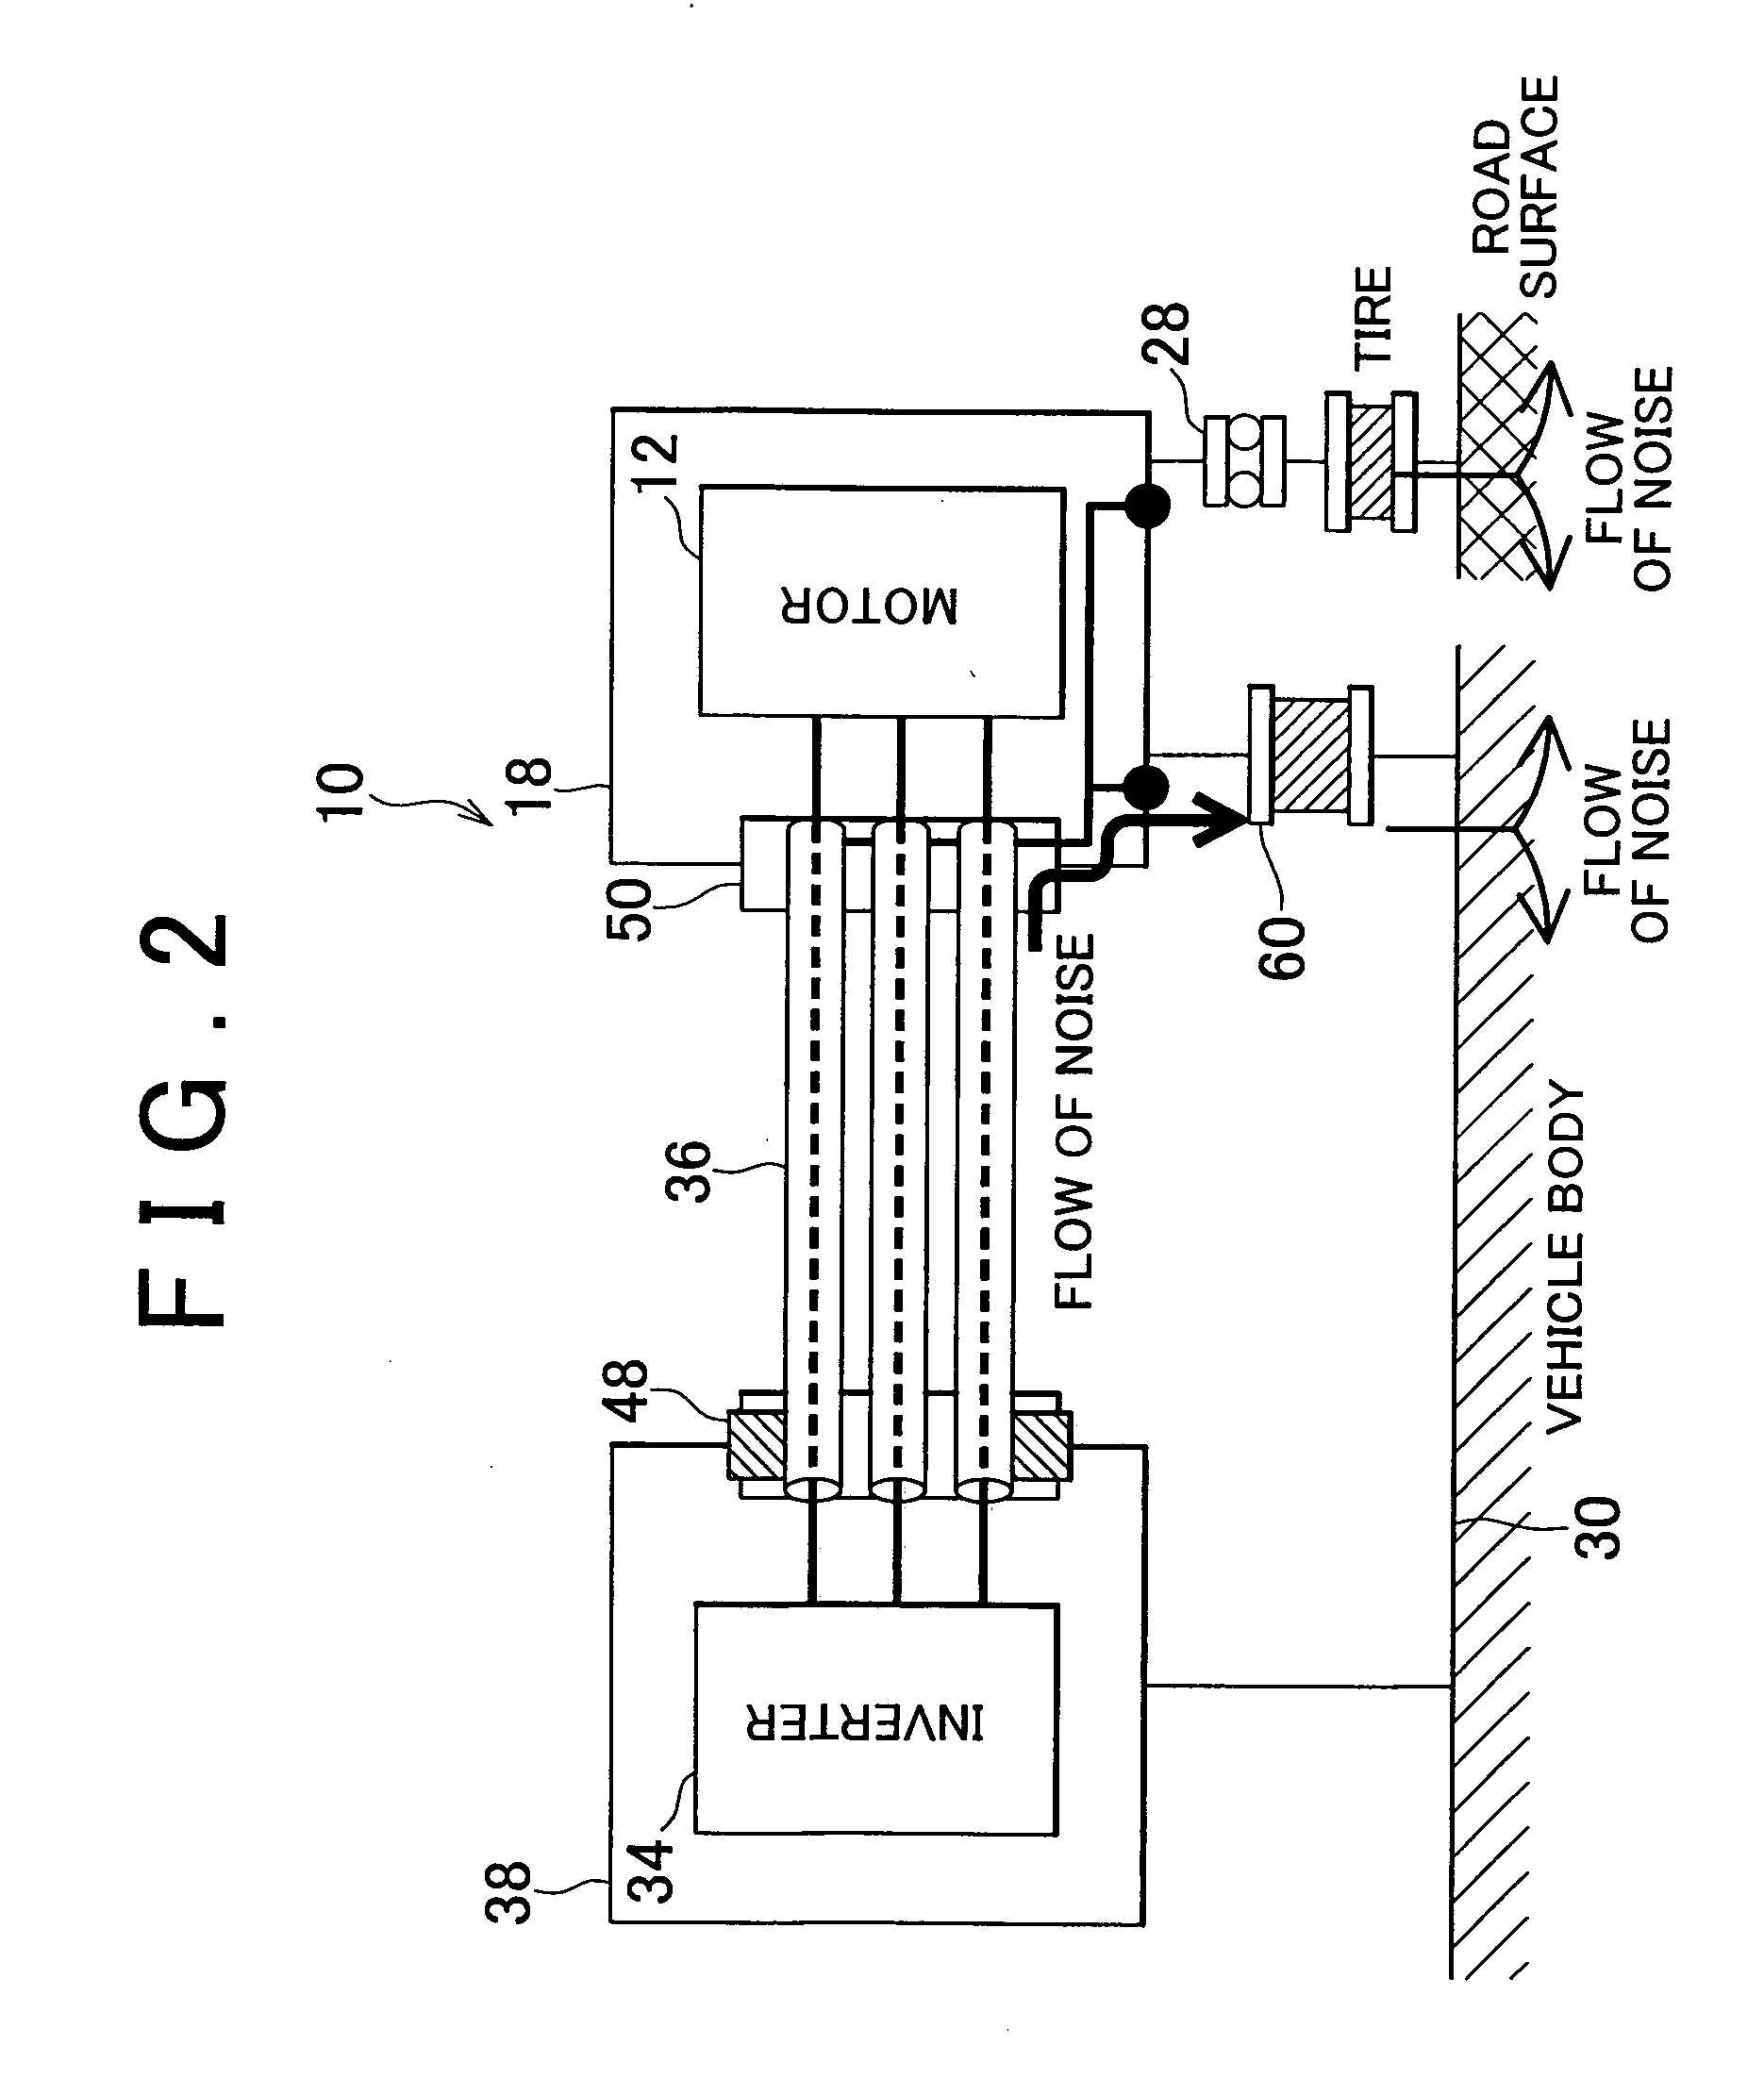 Vehicle motor driving system